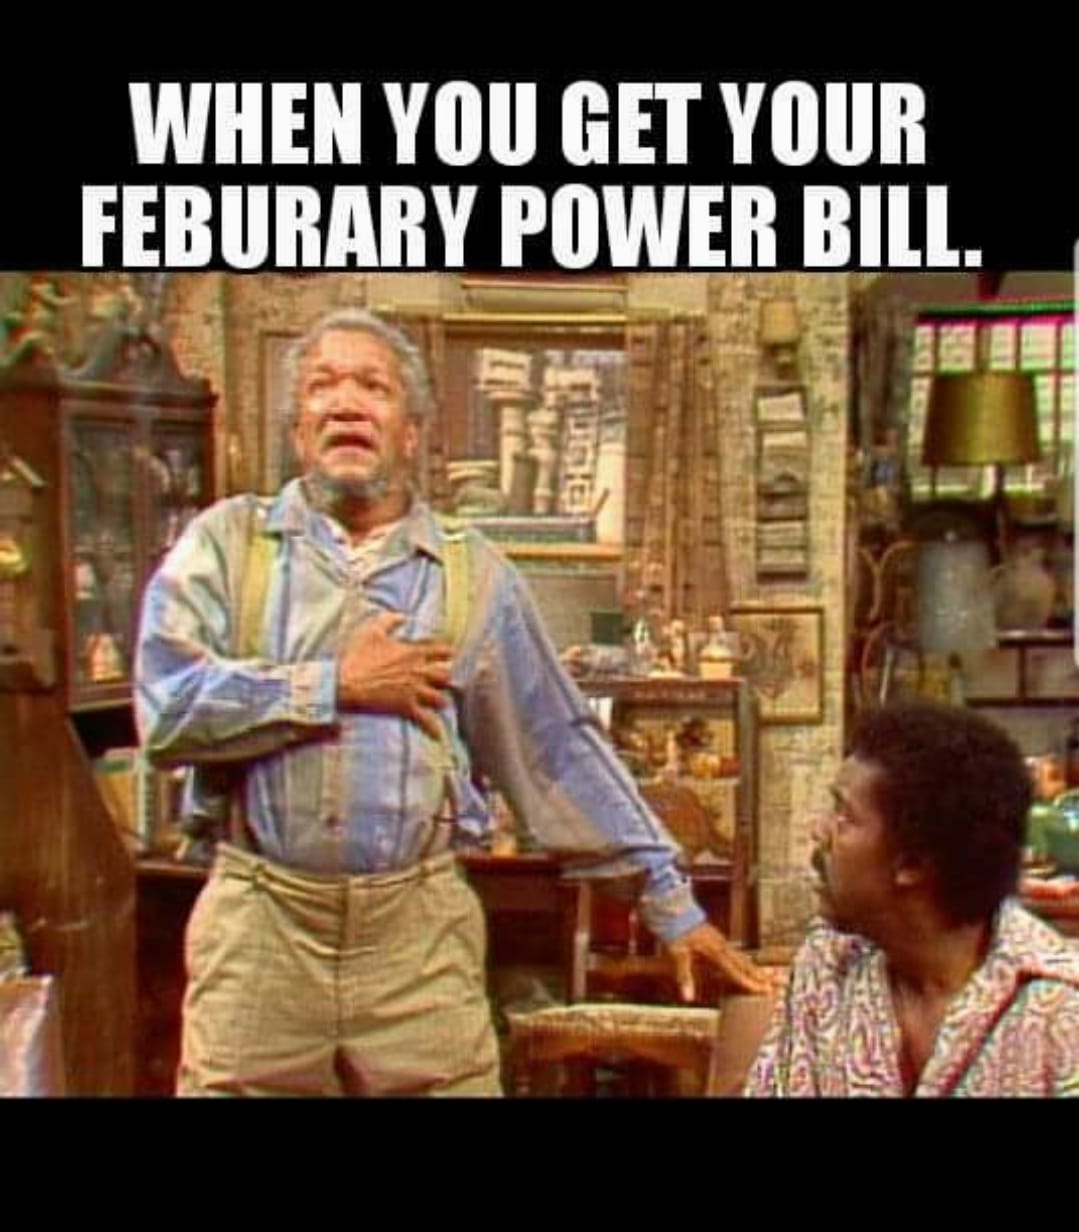 sanford and son heart attack - When You Get Your Feburary Power Bill.